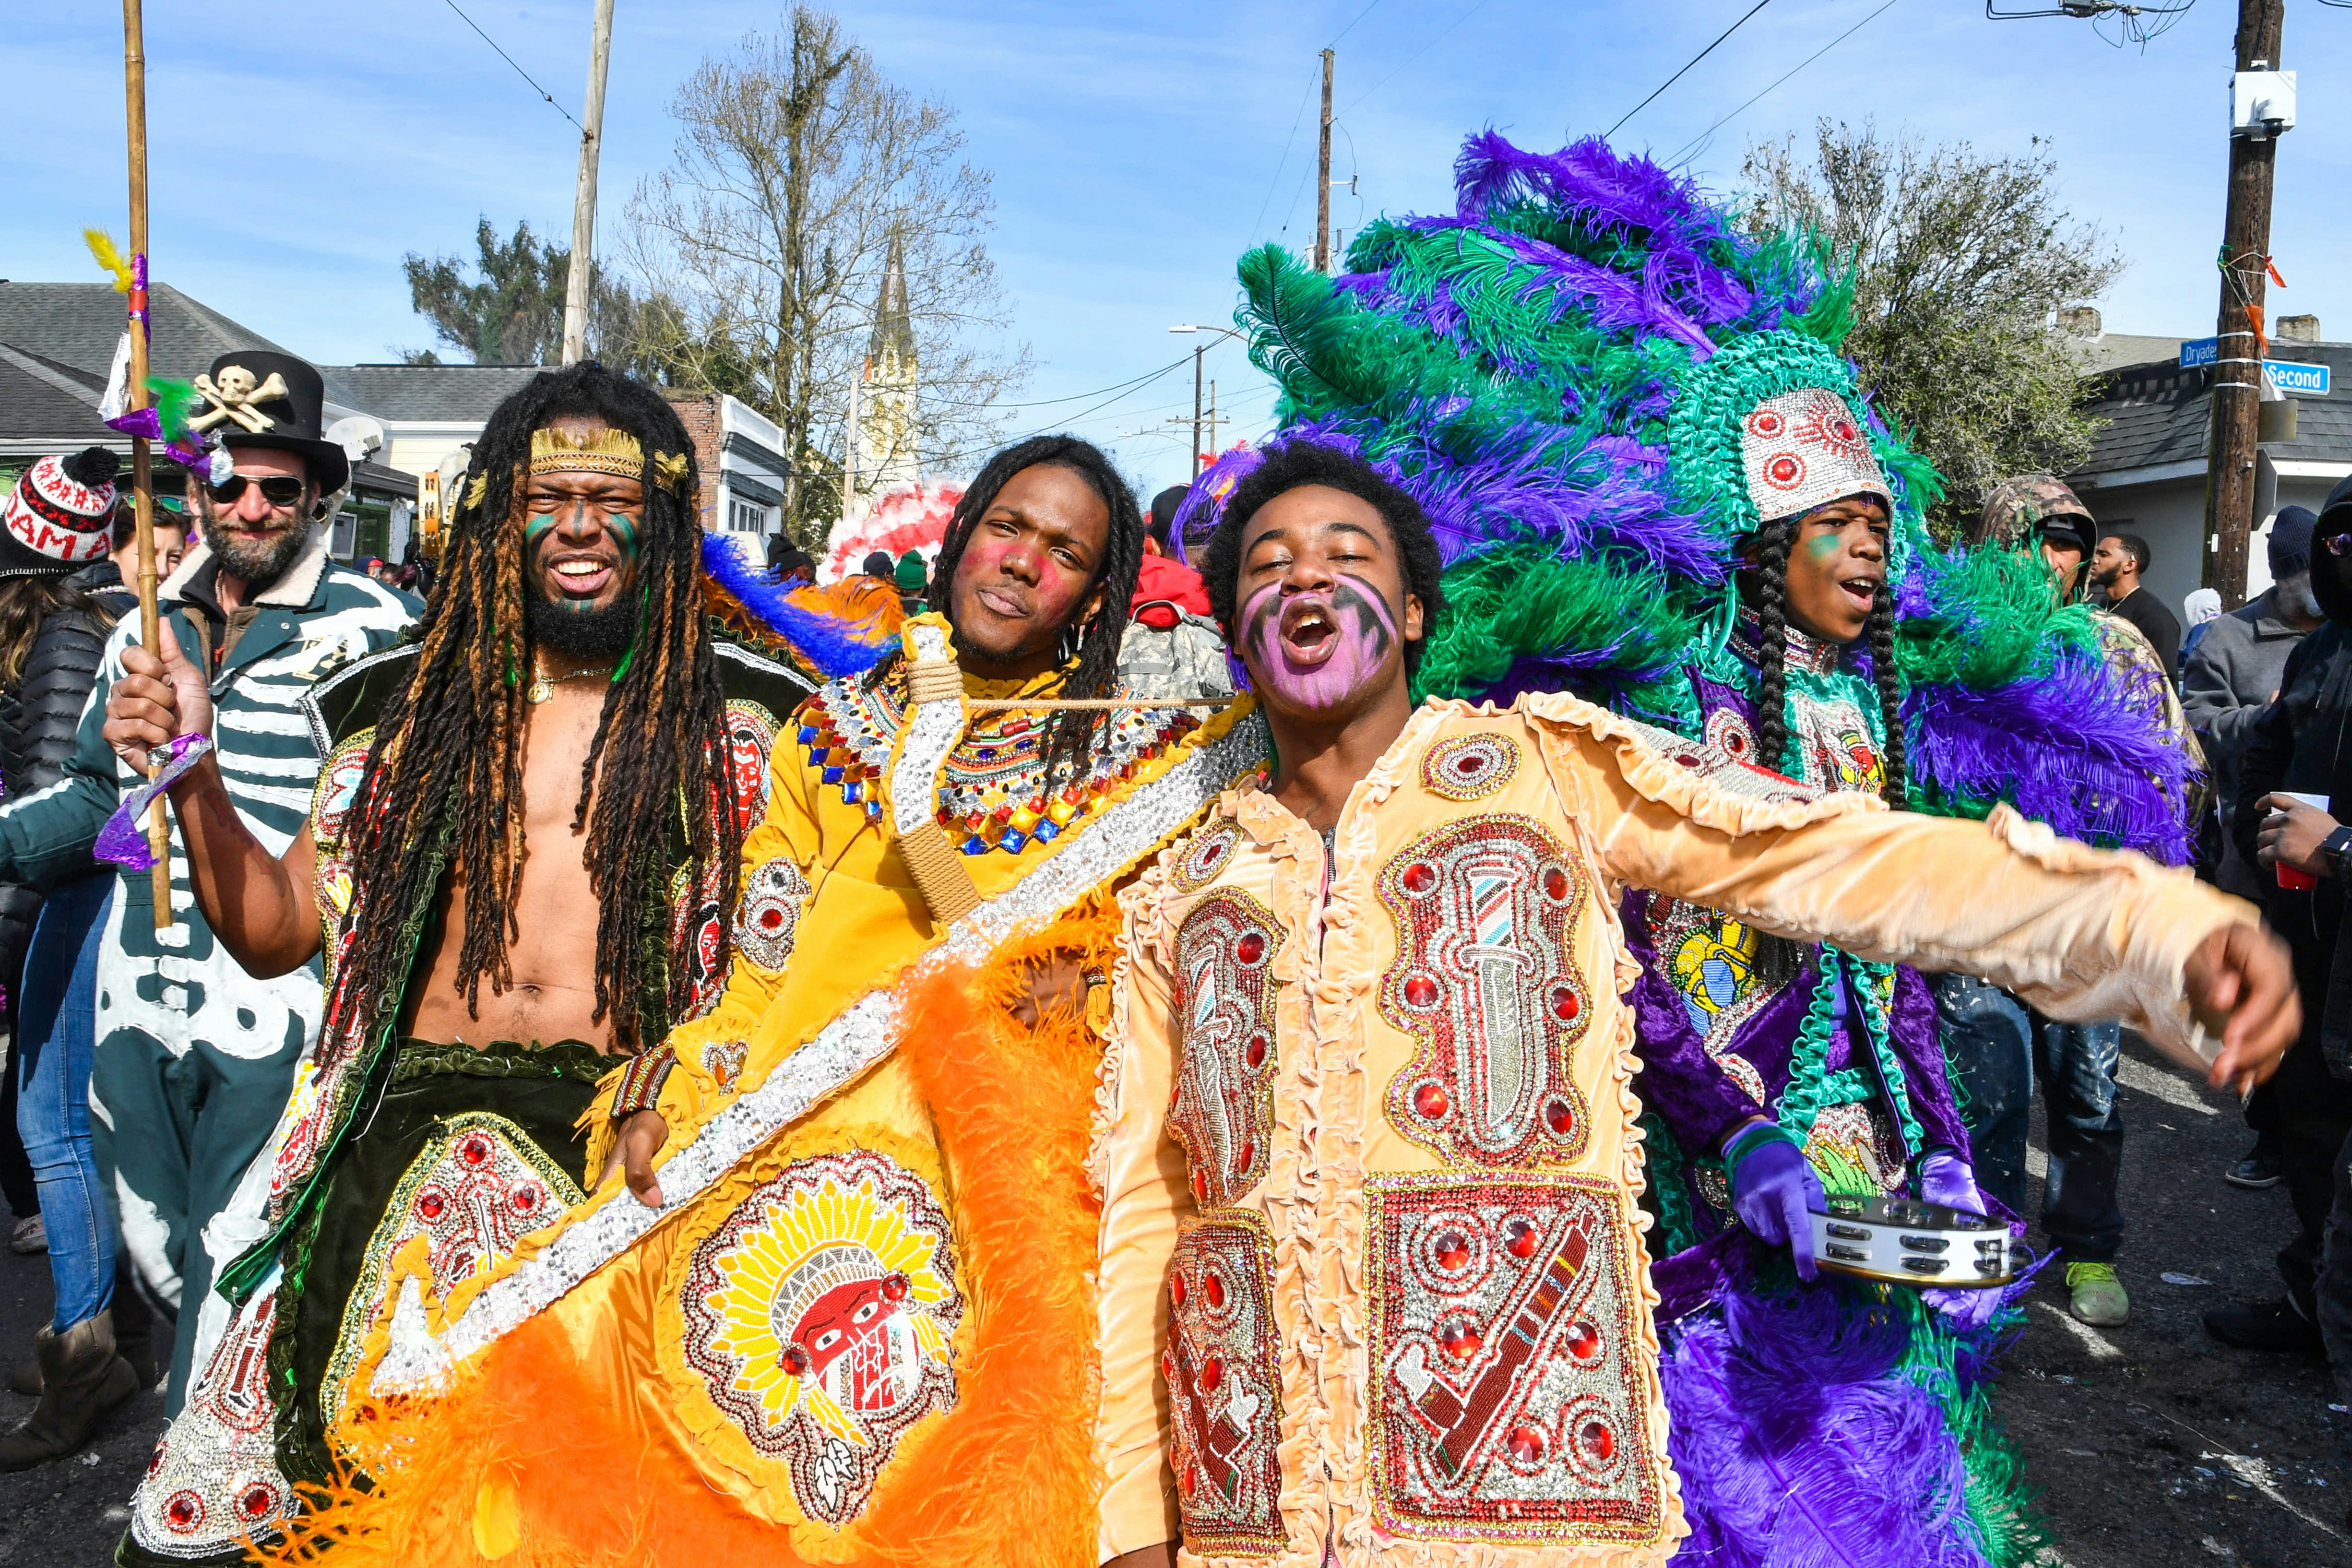 NEW ORLEANS, LOUISIANA - MARCH 05: (L-R) Lawrence Boudreaux, Marwan Pleasant, Jwan Boudreaux,  and Nigel Pleasant of the Golden Eagles Mardi Gras Indians face off with another tribe on March 5, 2019 in New Orleans, Louisiana. (Photo by Erika Goldring/Getty Images)